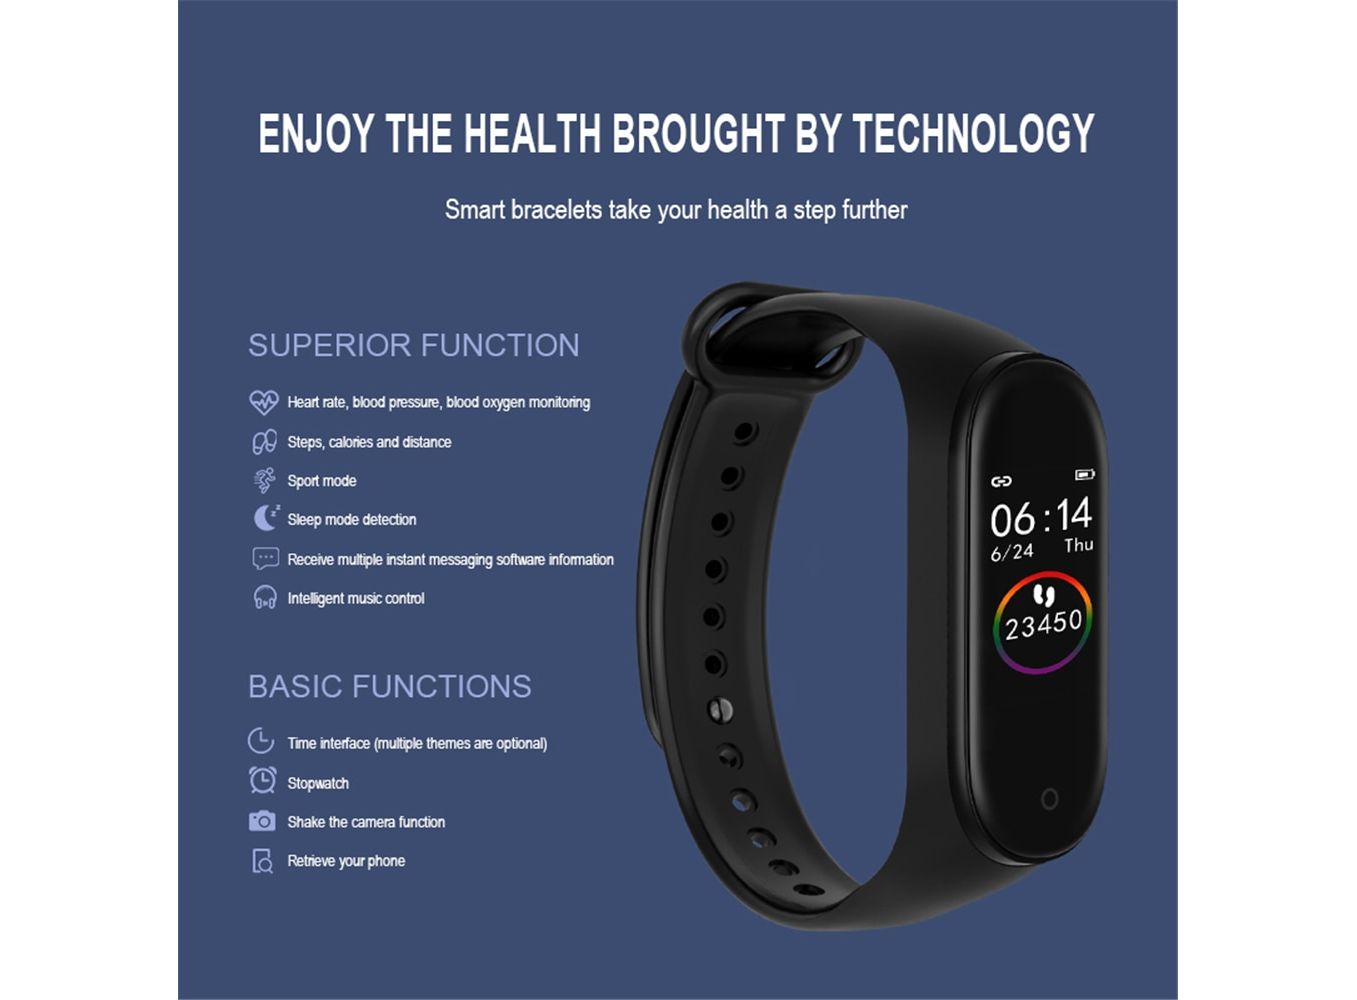 Shop Smartwatches, Fitness Trackers, and More | Fitbit